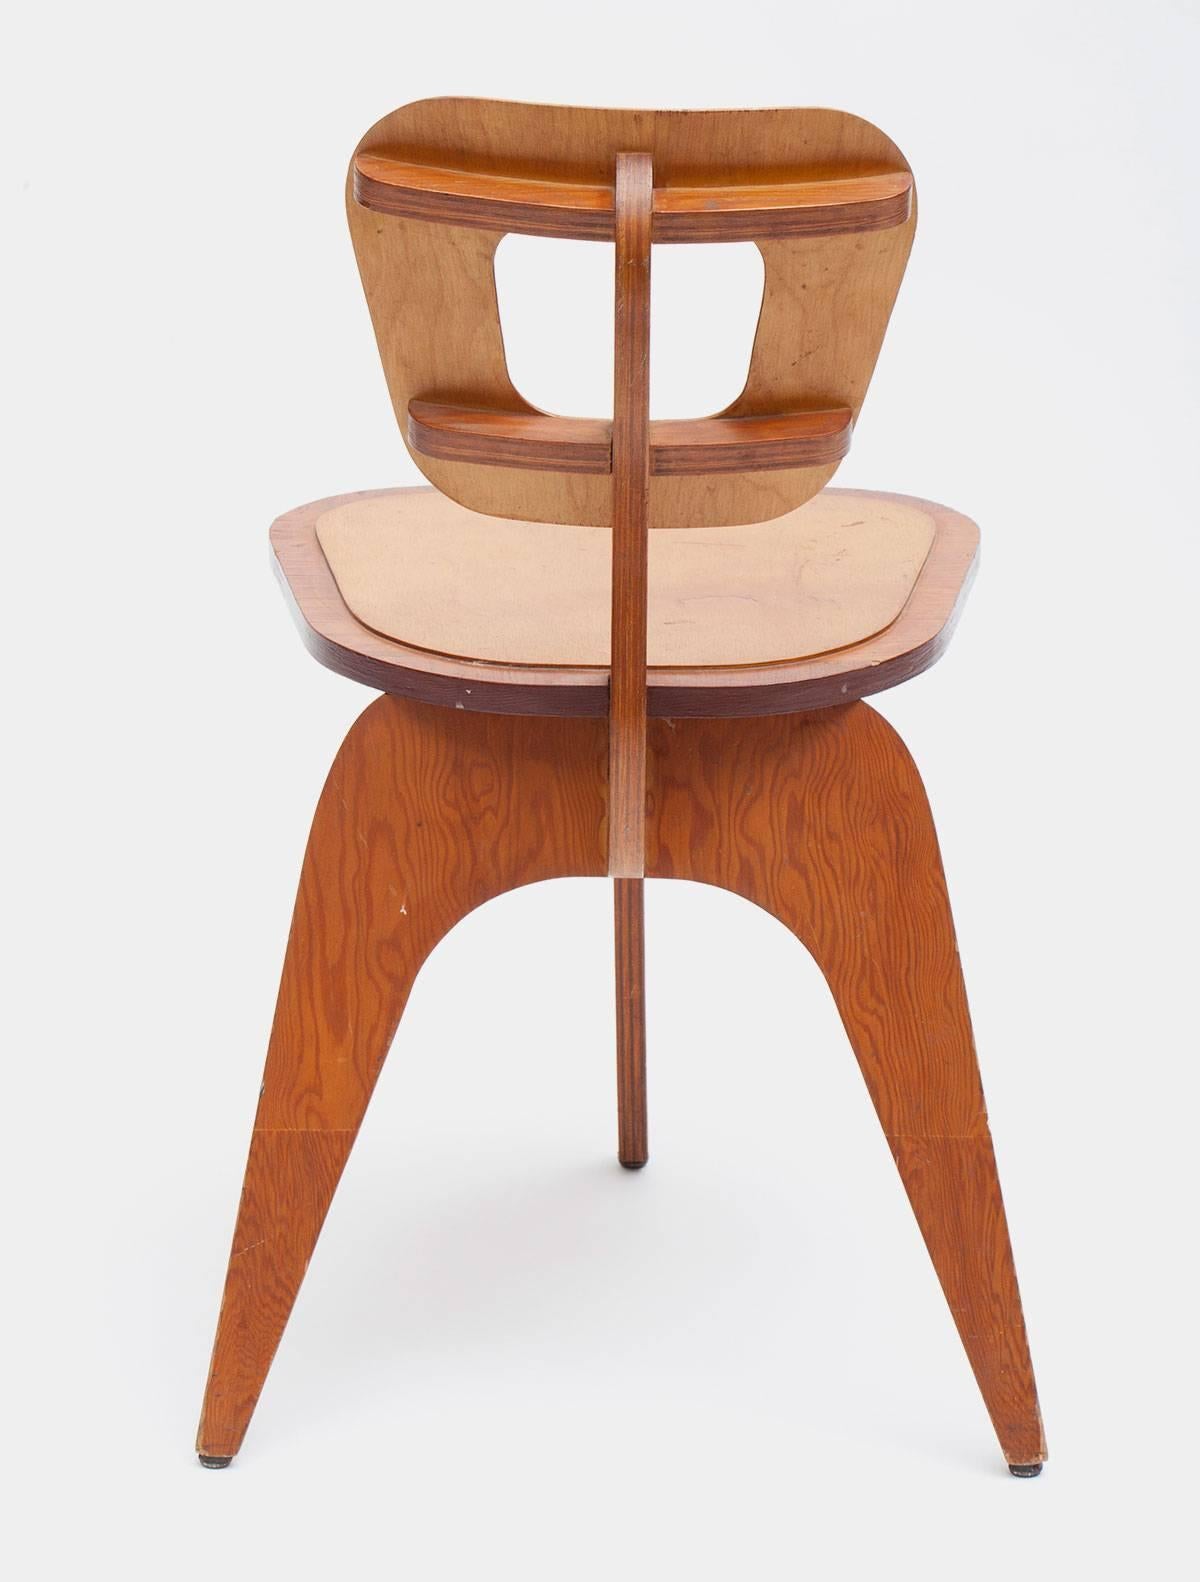 Modernist plywood chair by Arthur Collani, from a design published in 